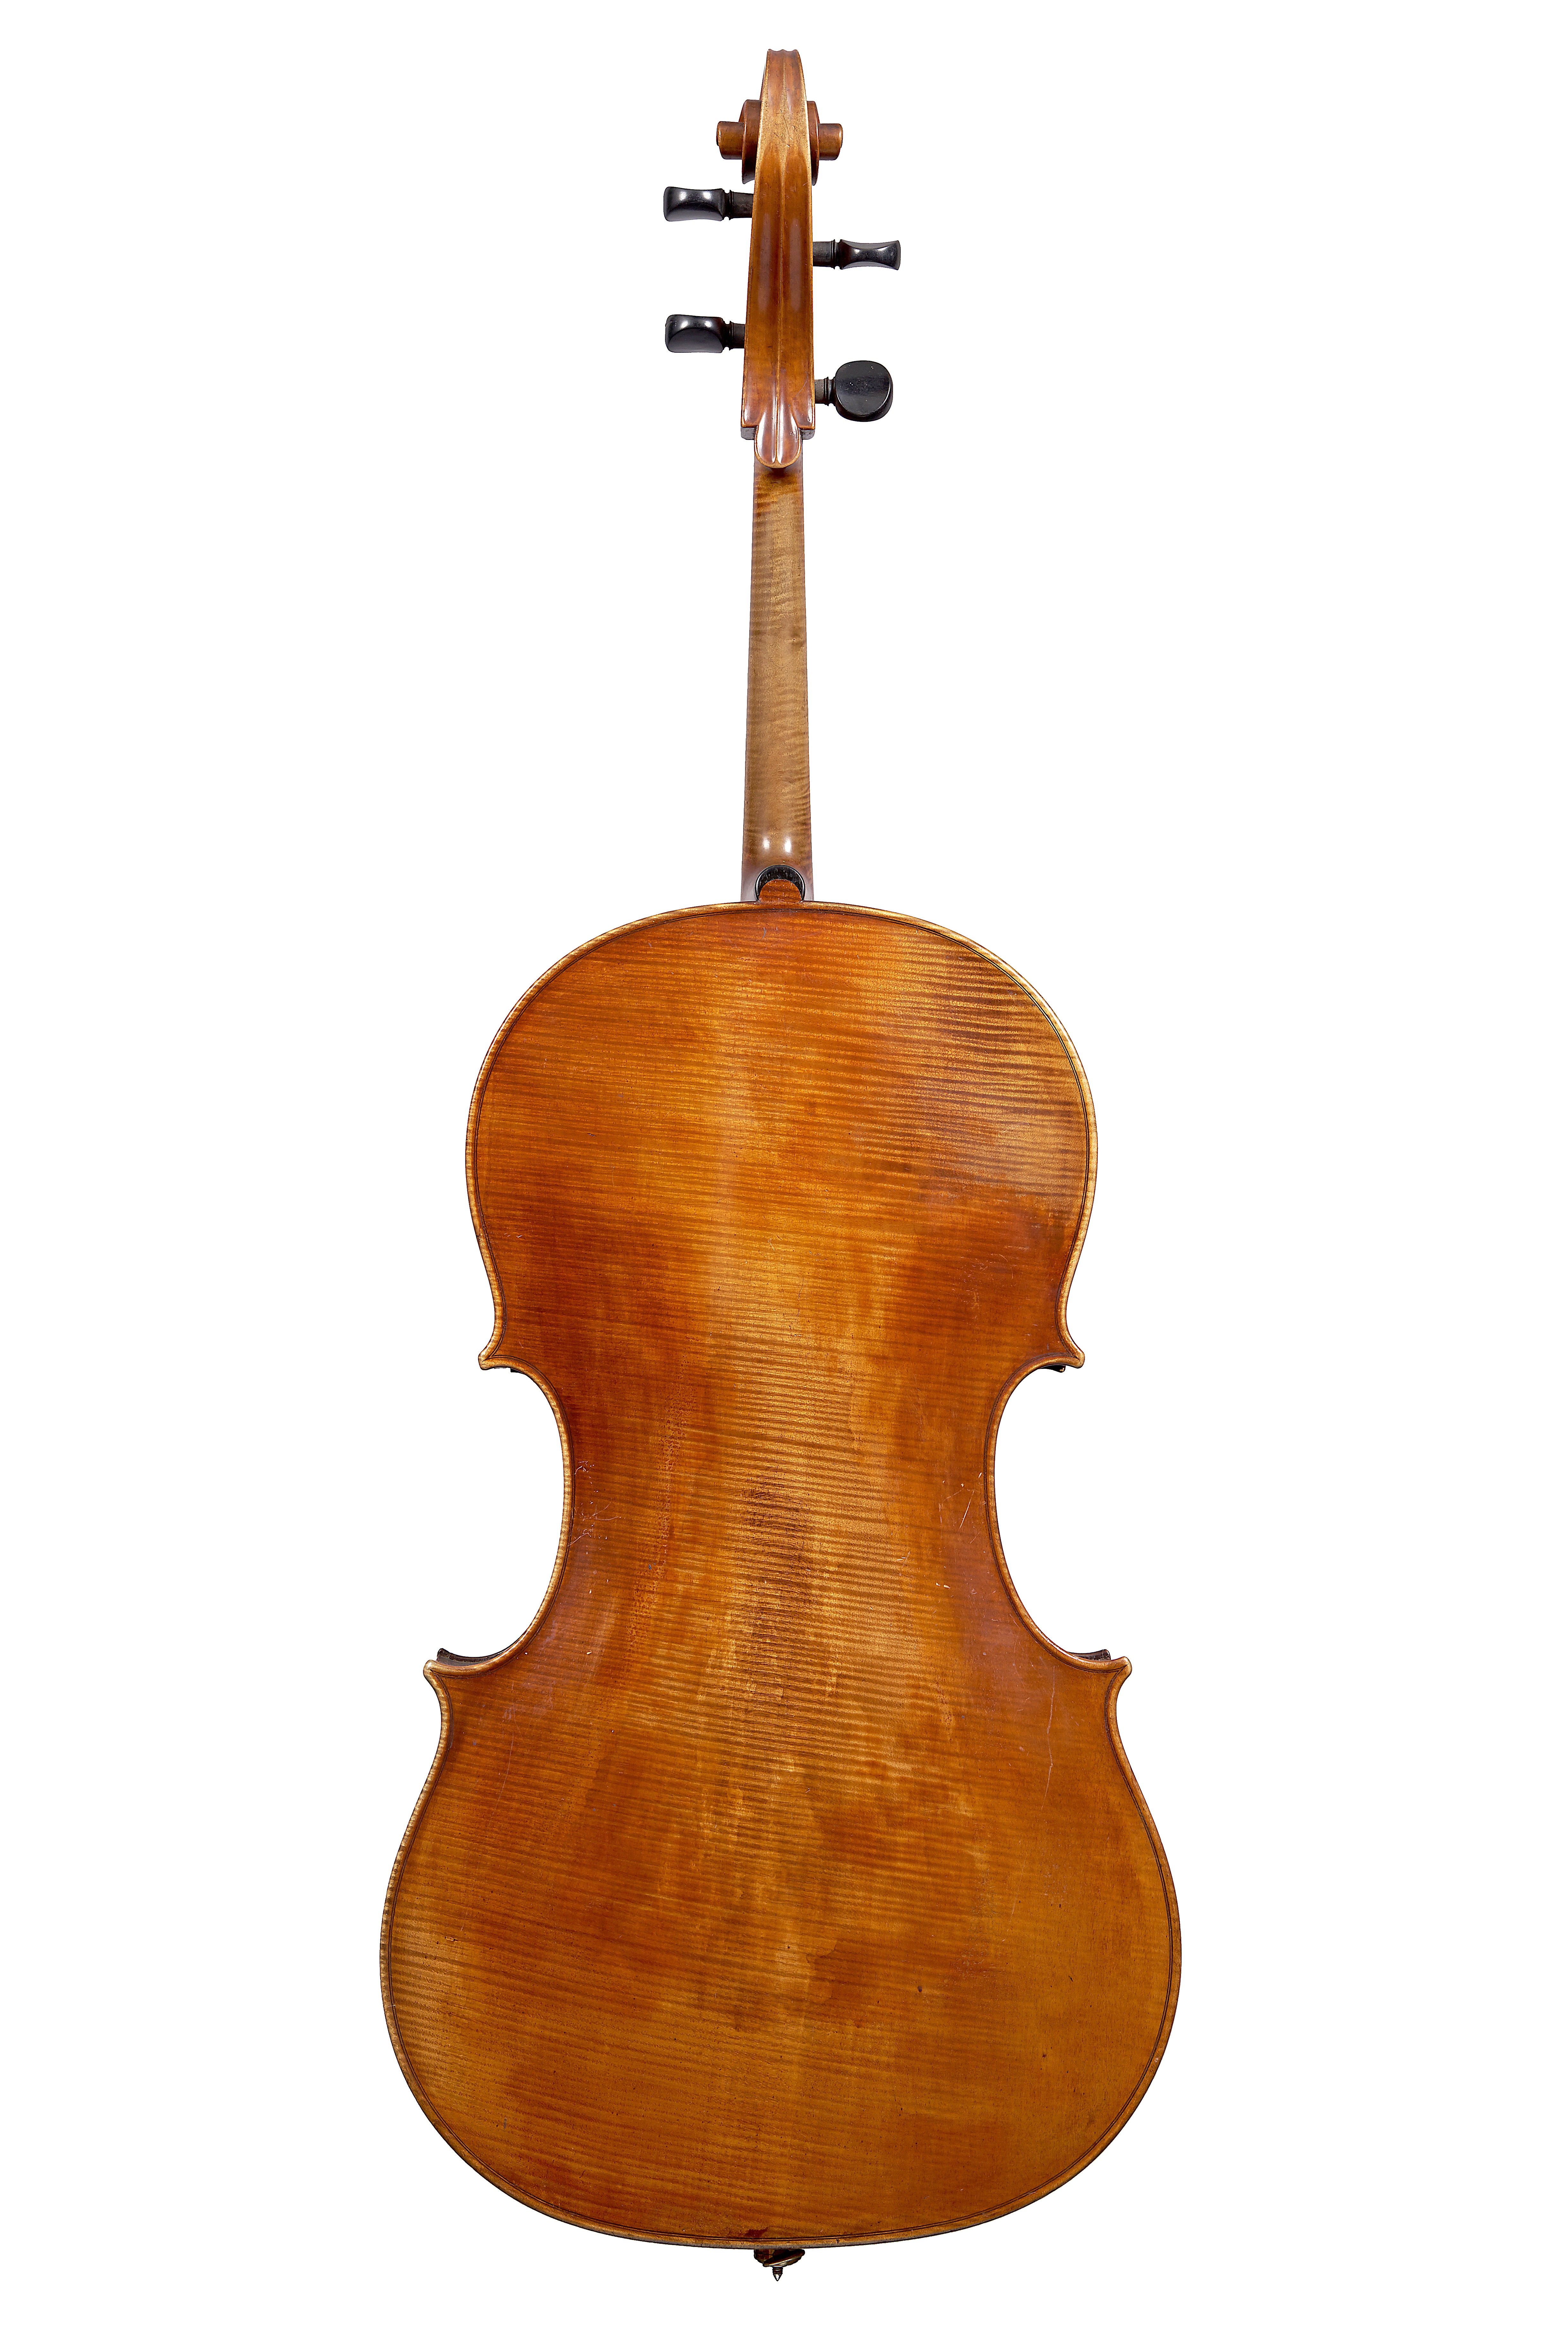 Lot 170 A Fine And Interesting Cello Probably English